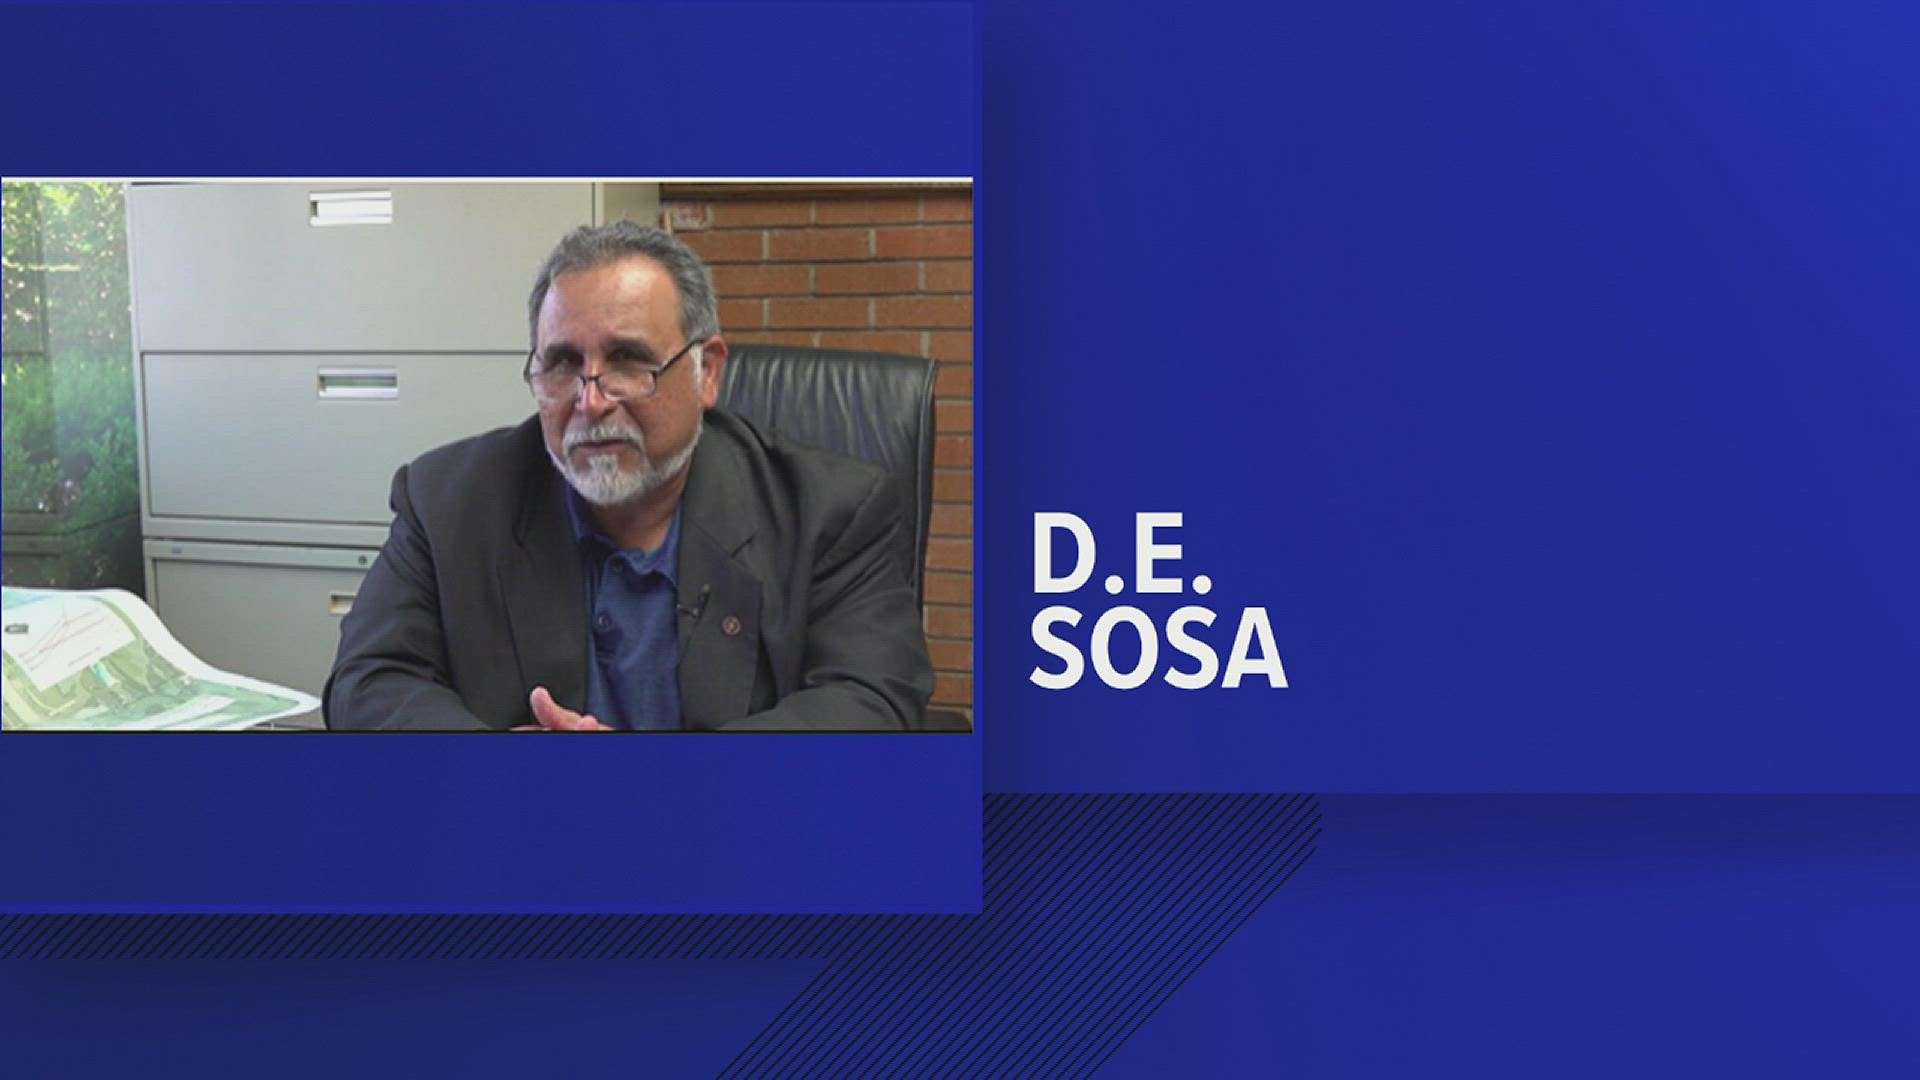 As Sosa was leaving Groves City Hall, he told 12News he's happy to help the incoming city manager in any way that he can.